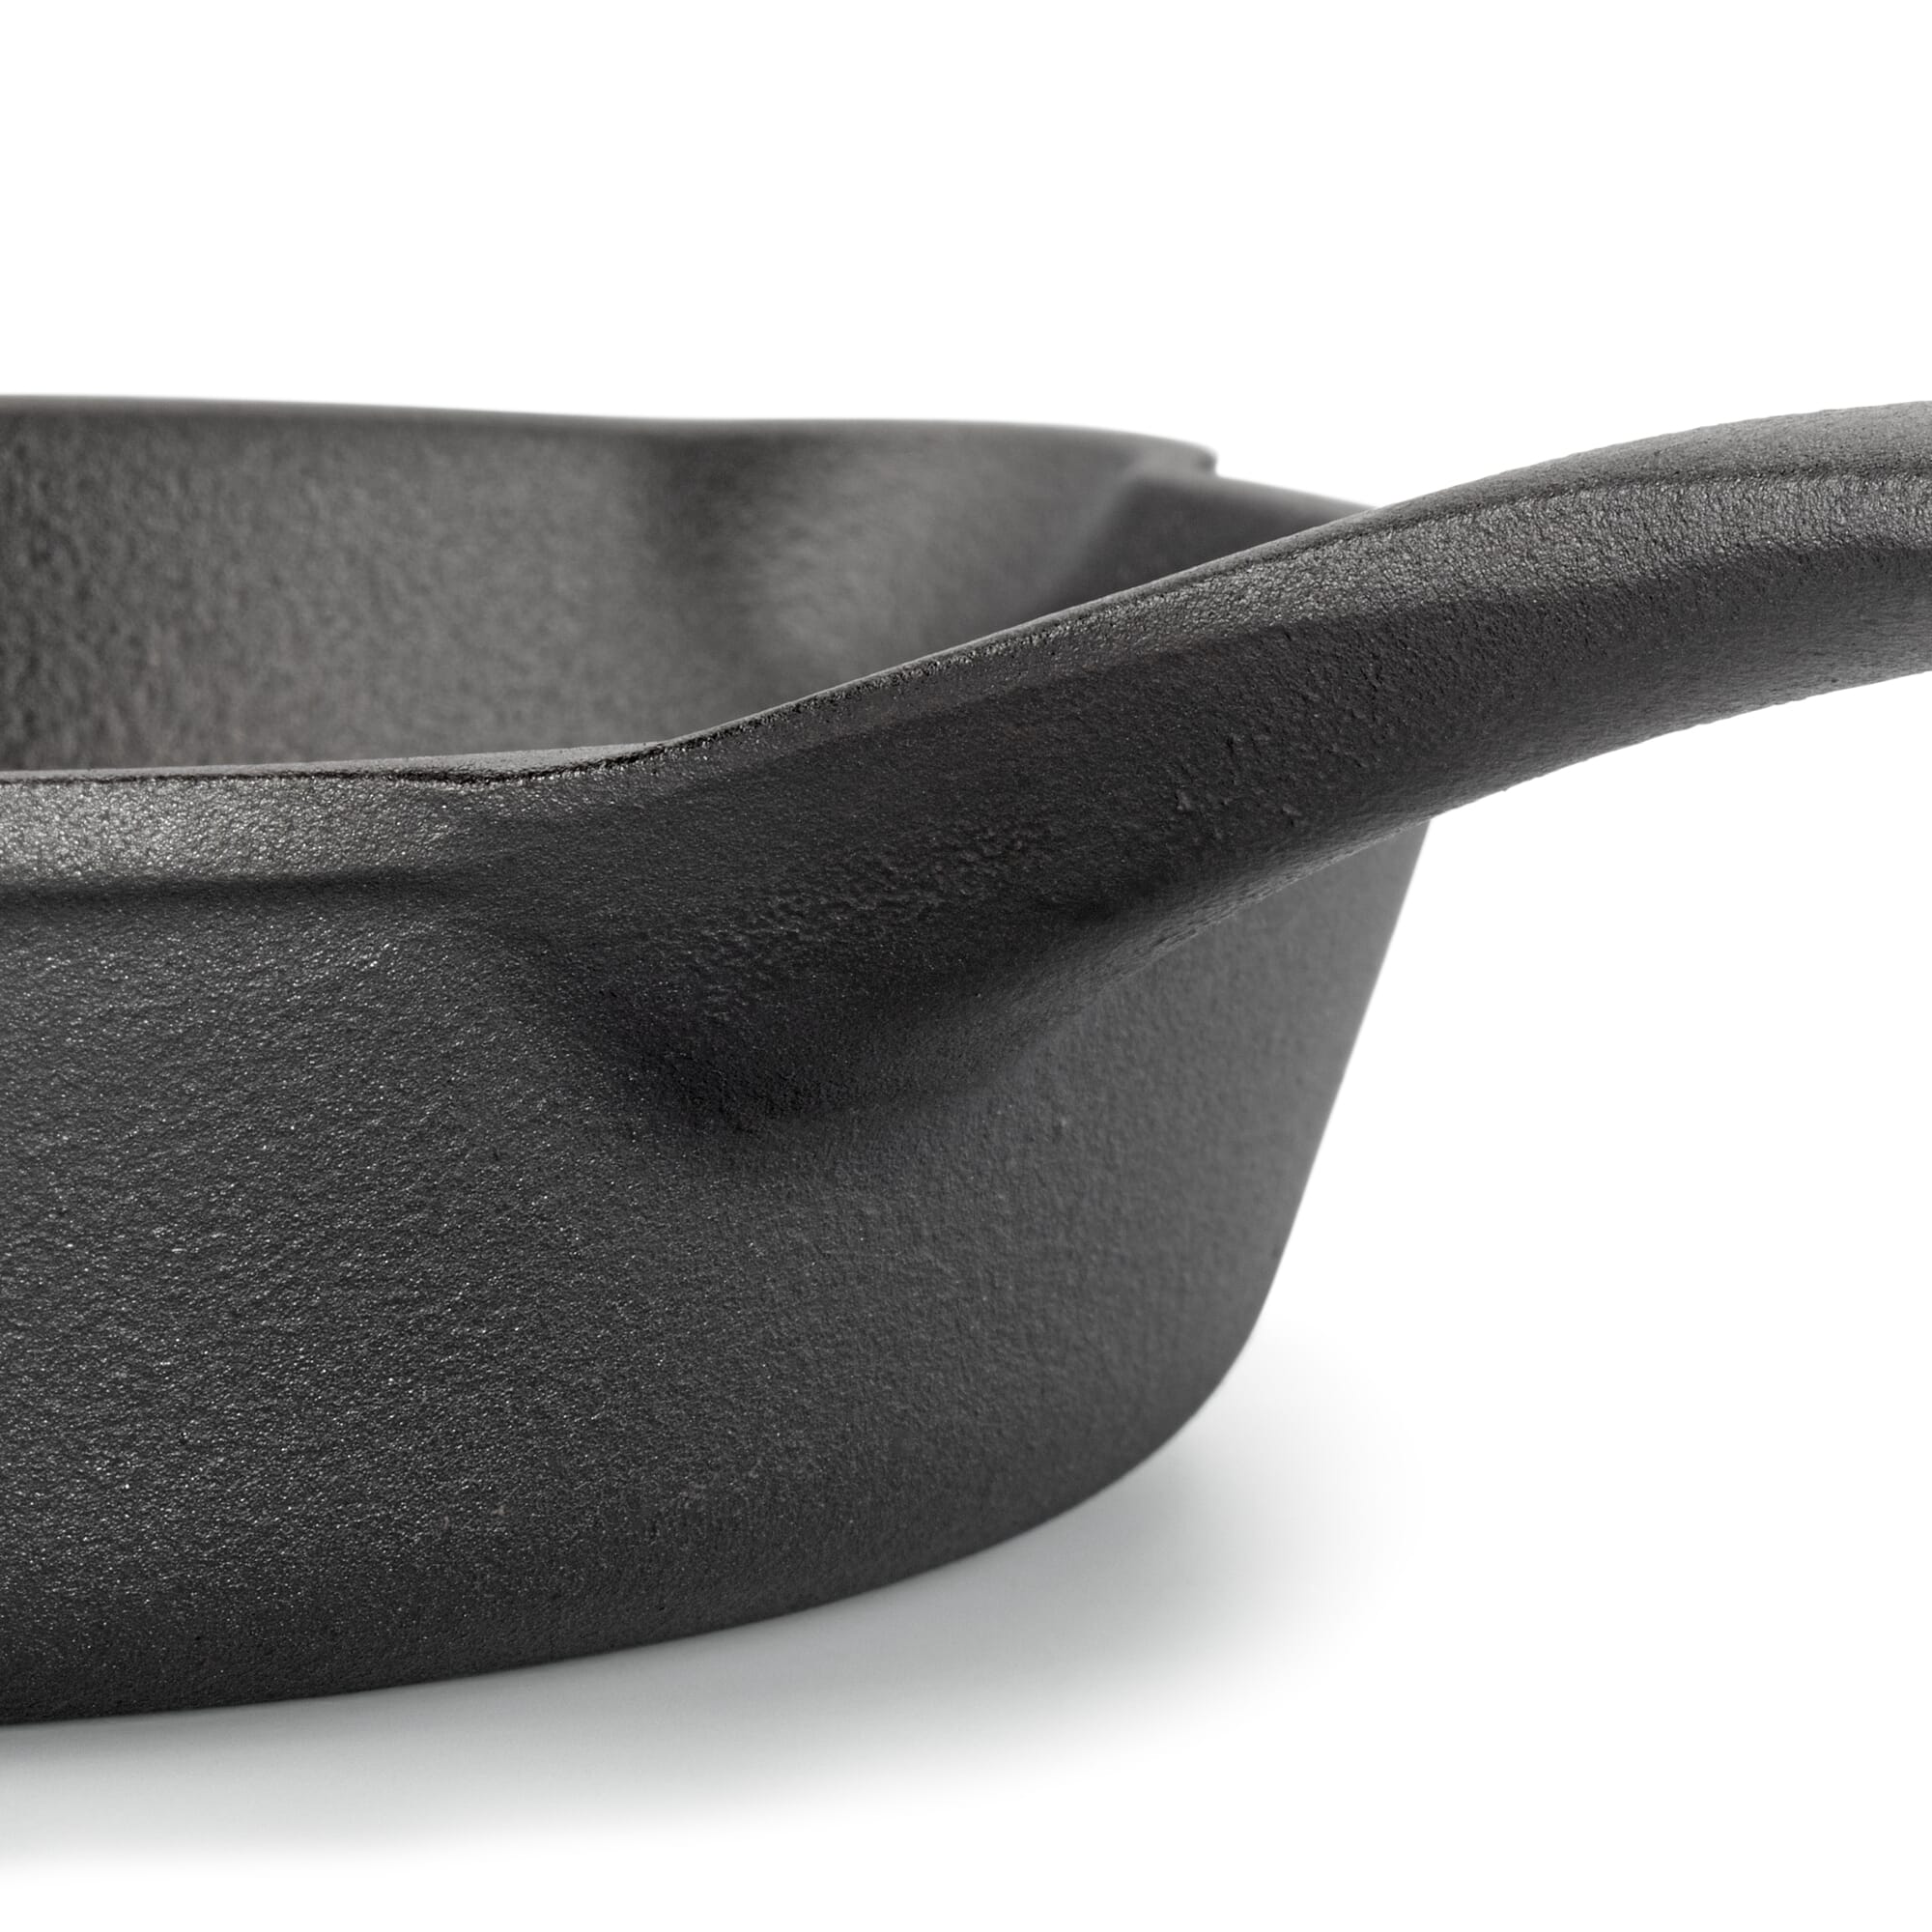 Victoria Cast Iron Skillet. Frying Pan With Long Handle 10 for sale online